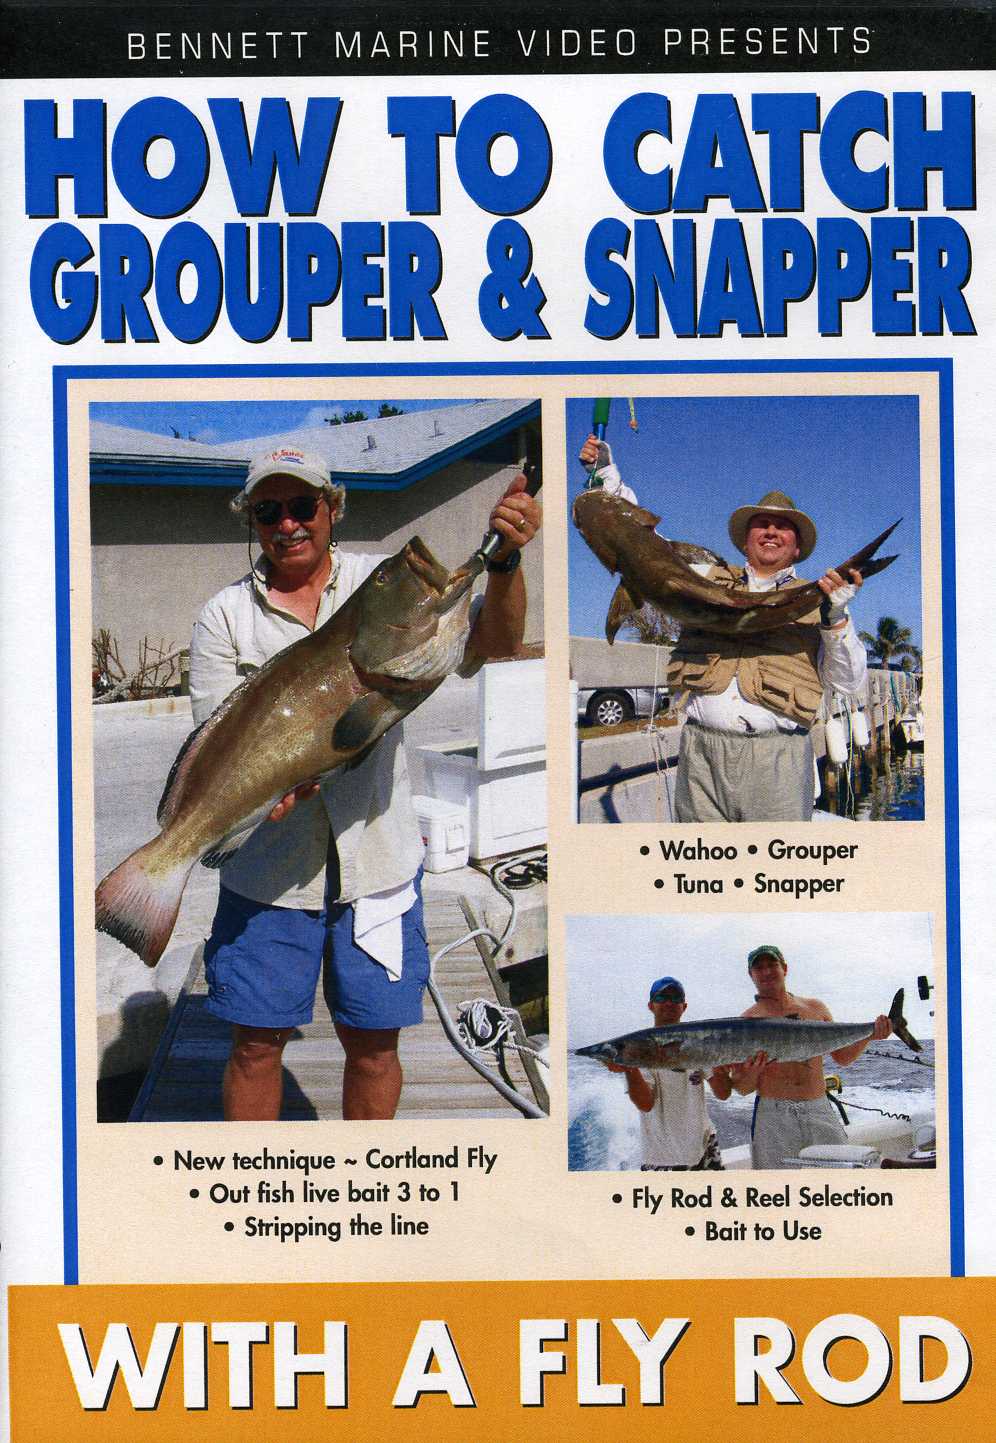 CAPTAIN FRANK: HOW TO GROUPER & SNAPPER ON A FLY